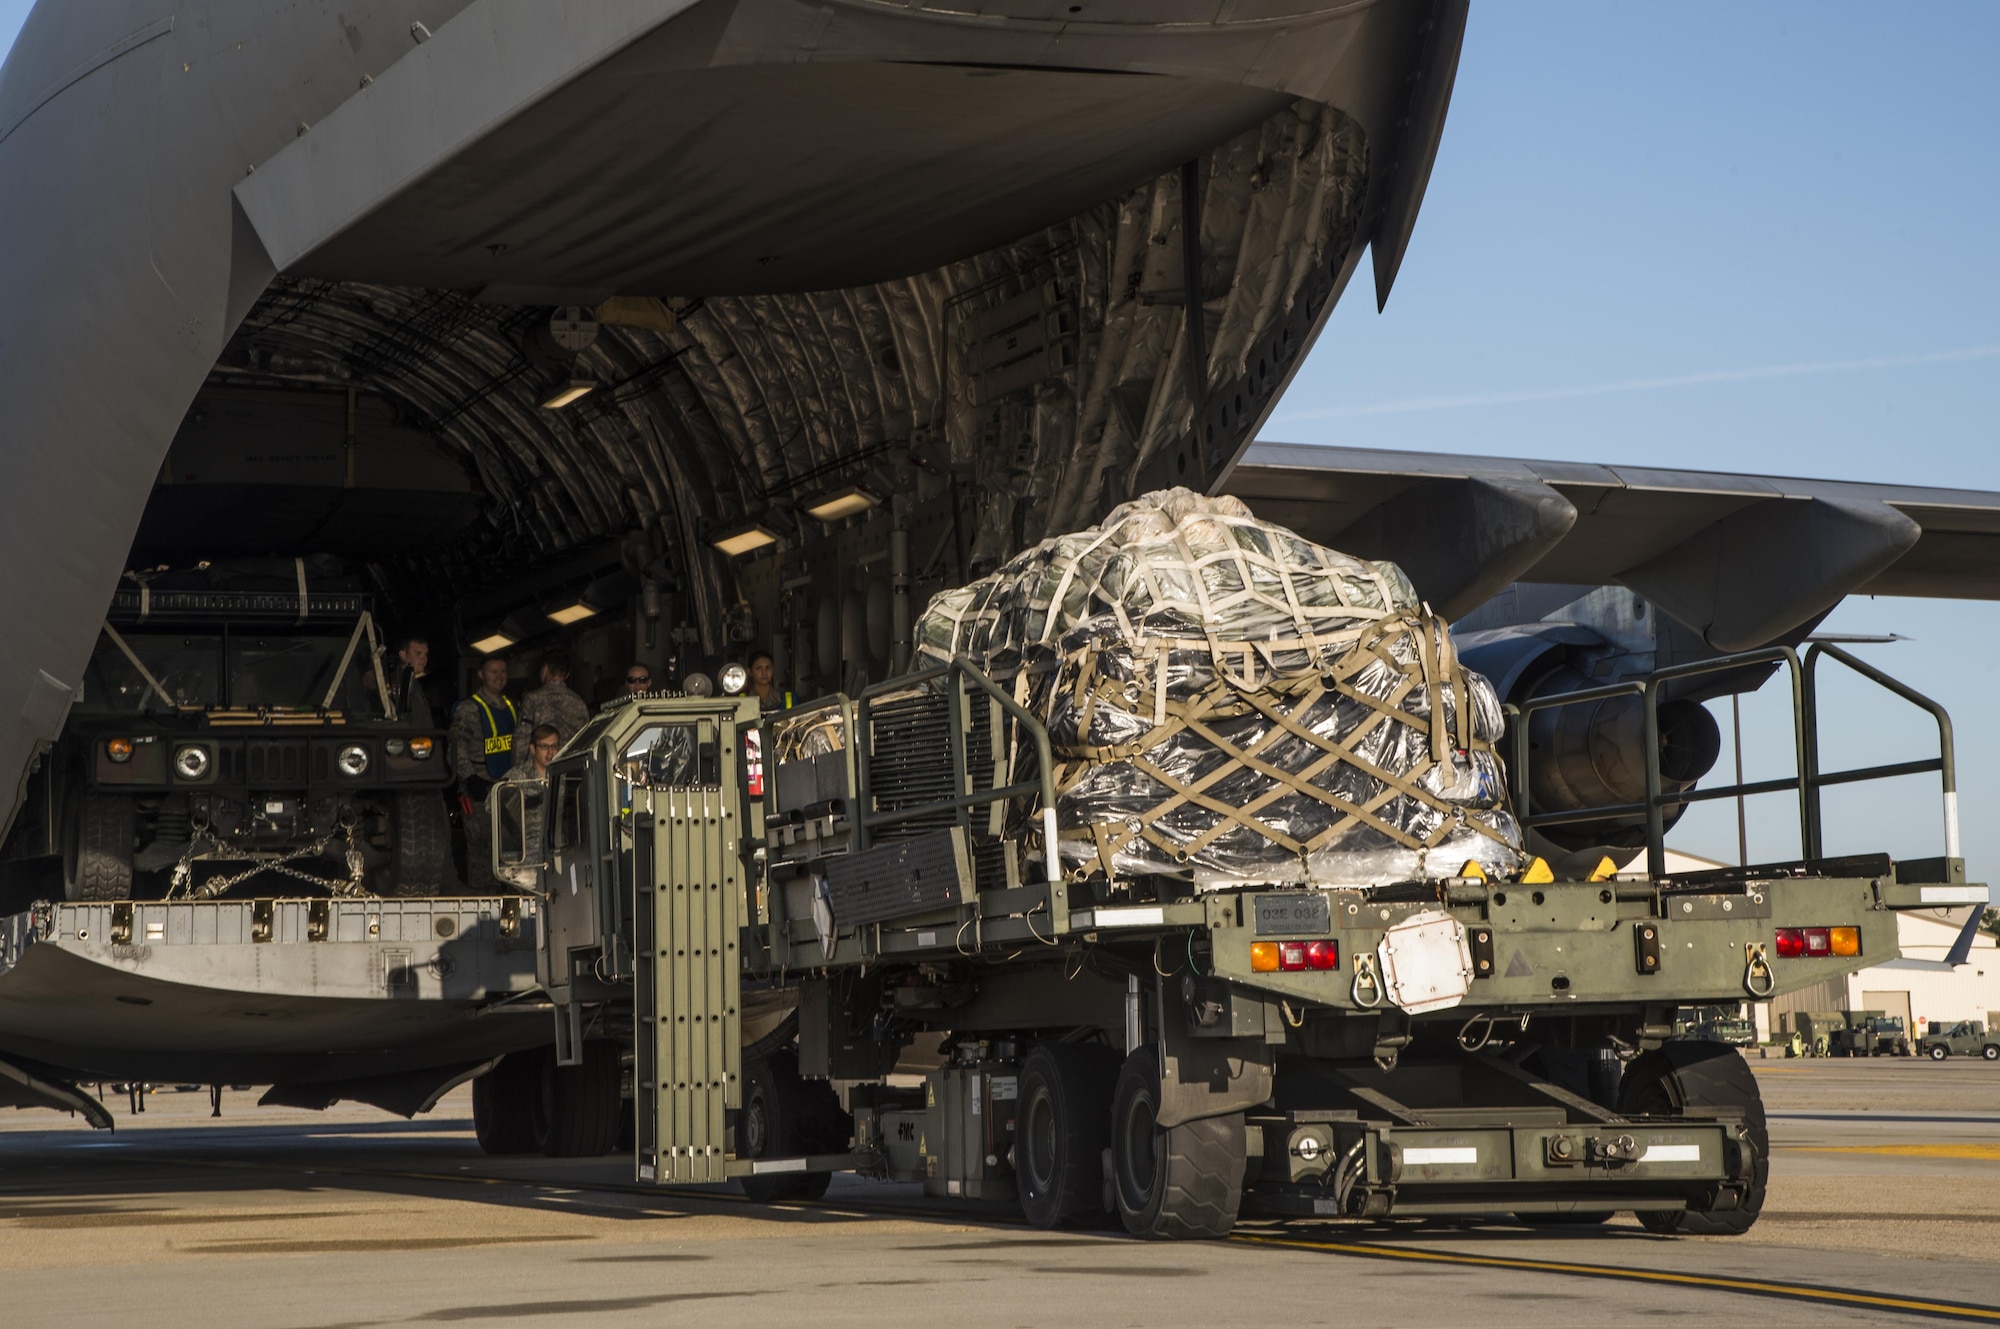 Equipment is loaded onto a C-17 Globemaster III at Joint Base McGuire-Dix-Lakehurst, N.J. for a 621st Contingency Response Wing deployment mission to Port-au-Prince, Haiti, October 6, 2016. More than 30 CRW members will meet up with U.S. Army Soldiers assigned to the 689th Rapid Port Opening Element and members of the Defense Logistics Agency at Joint Base Langley-Eustis, Va. (U.S. Air Force photo by Tech. Sgt. Gustavo Gonzalez)